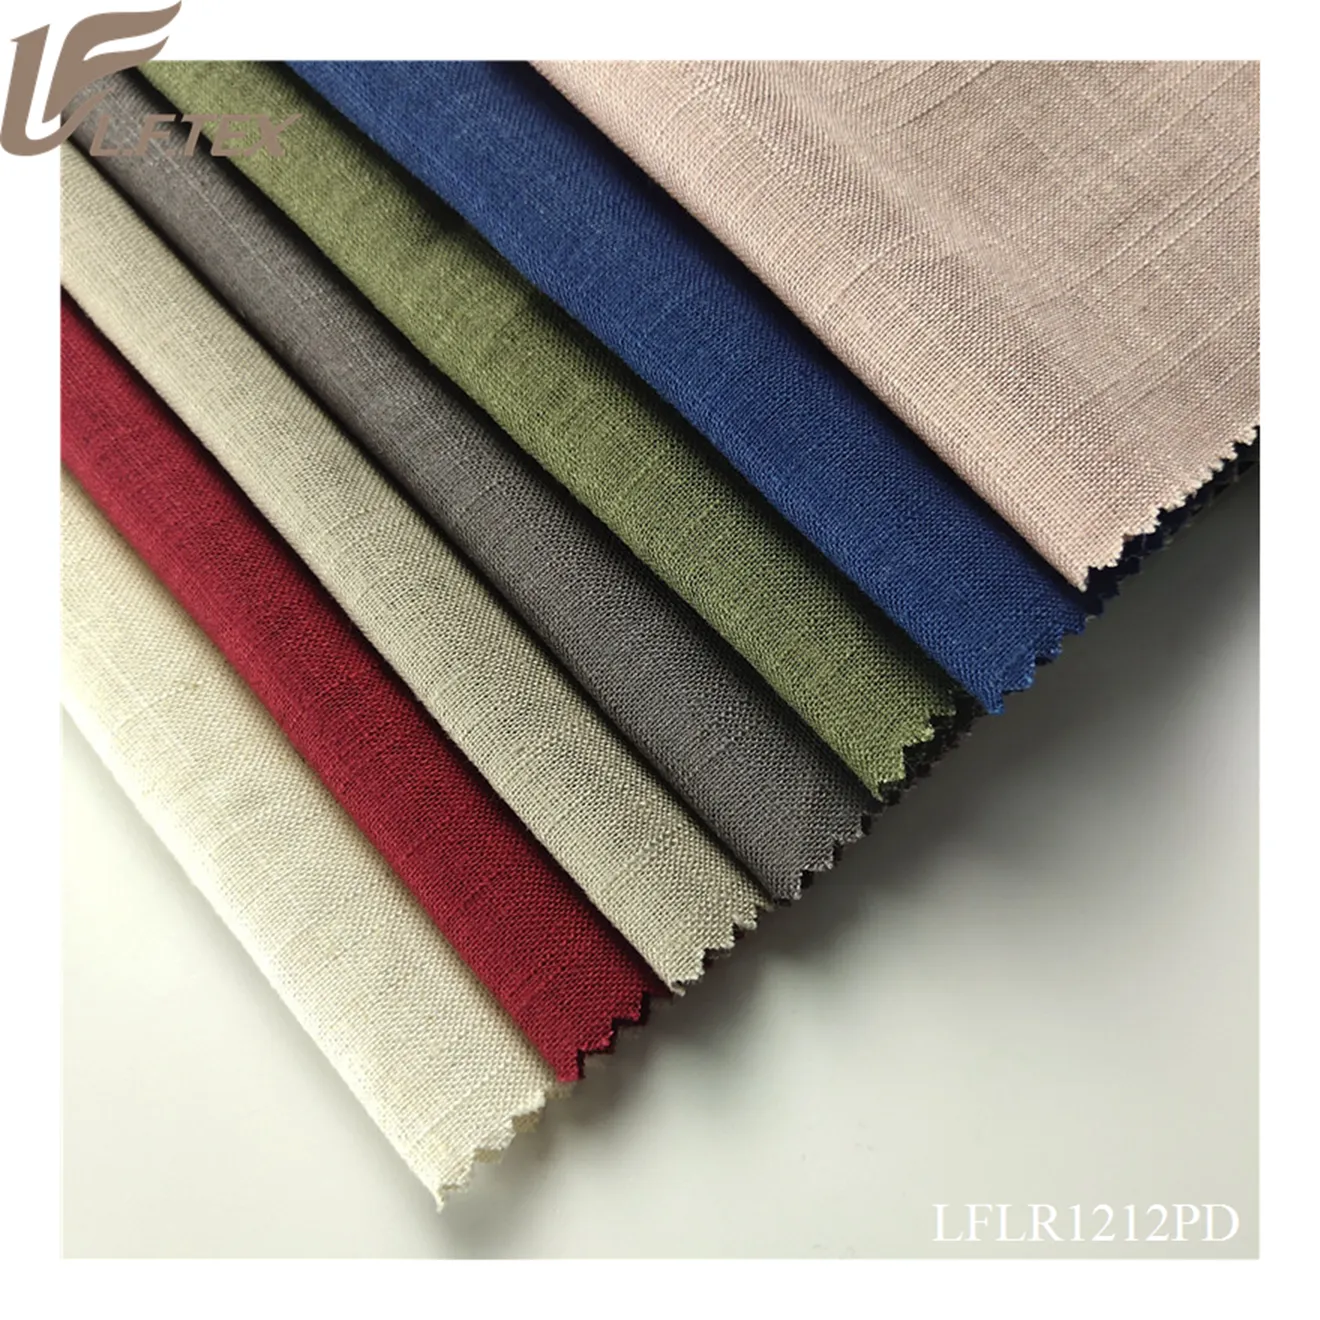 Grass cloth series rayon fabric flax linen solid color garment fabric woven continue dyeing for women dresses